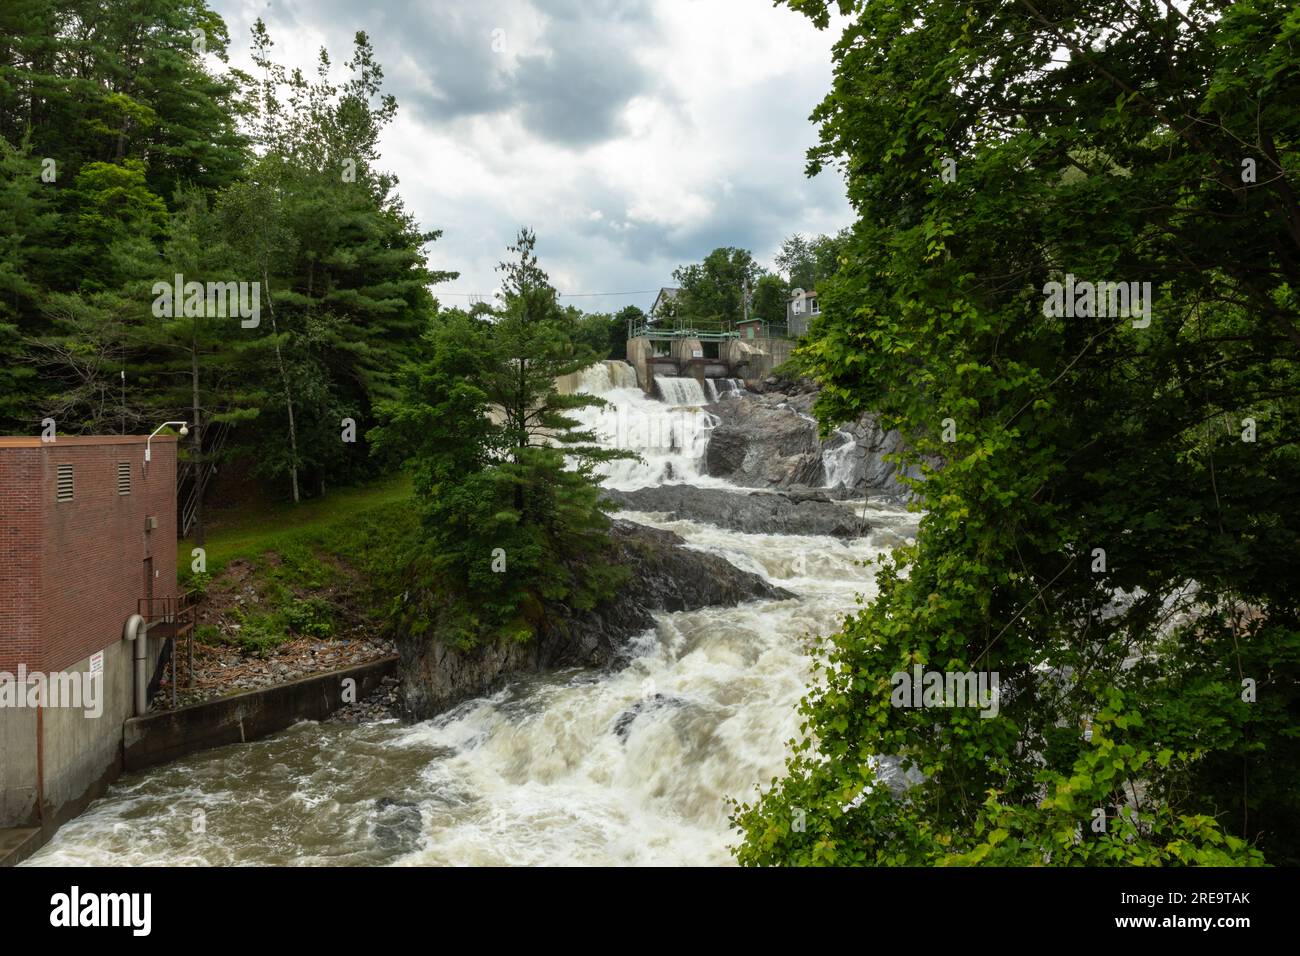 The Waits River Falls are seen in the quaint town of Bradford, Vermont. The waterfall is formed by a dam along the Waits River, a tributary of the Con Stock Photo